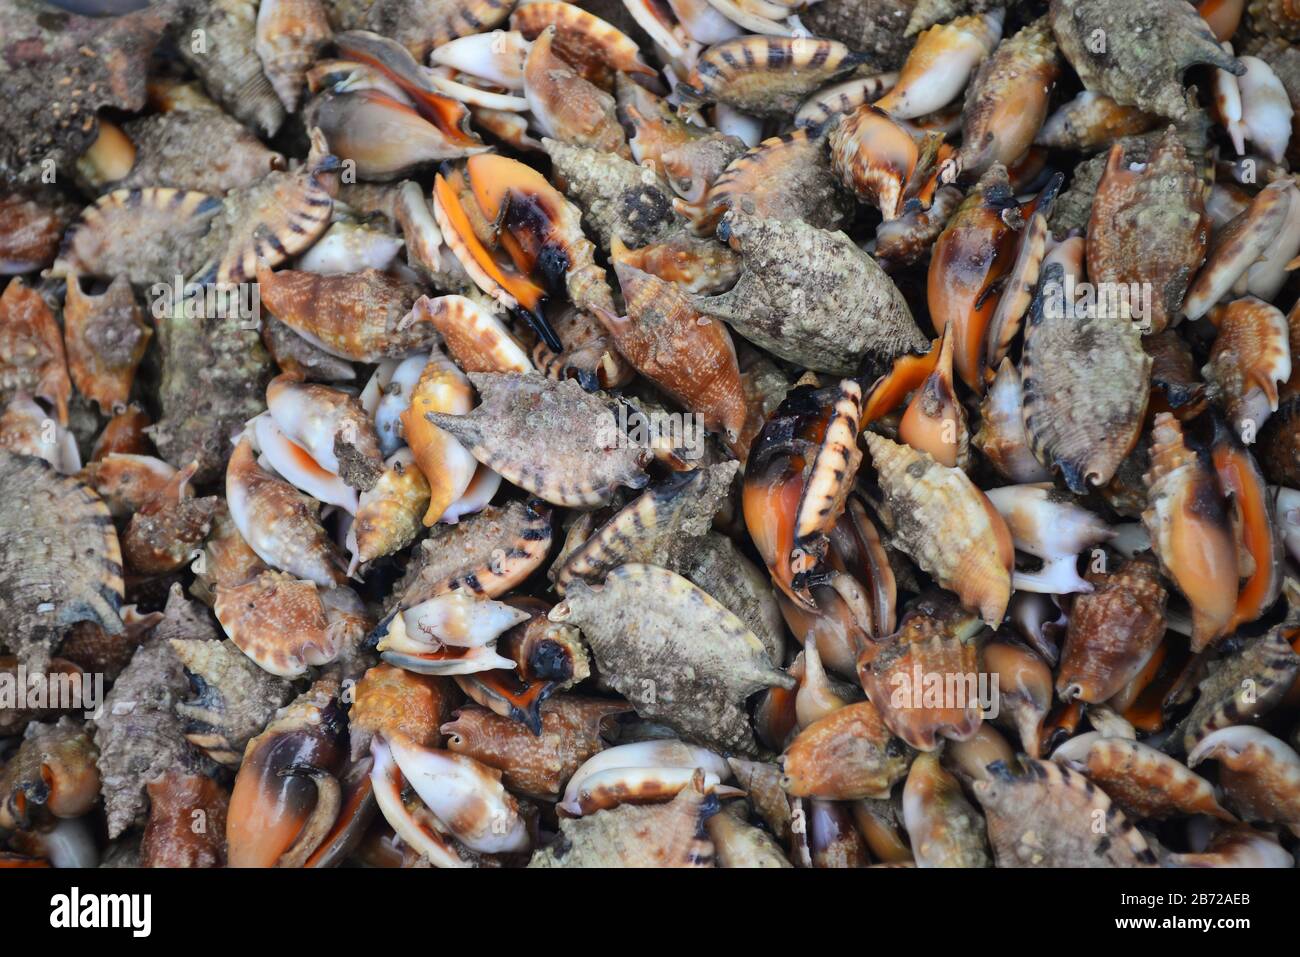 Group of Conch Sell in fresh seafood market, note  select focus with shallow depth of field Stock Photo